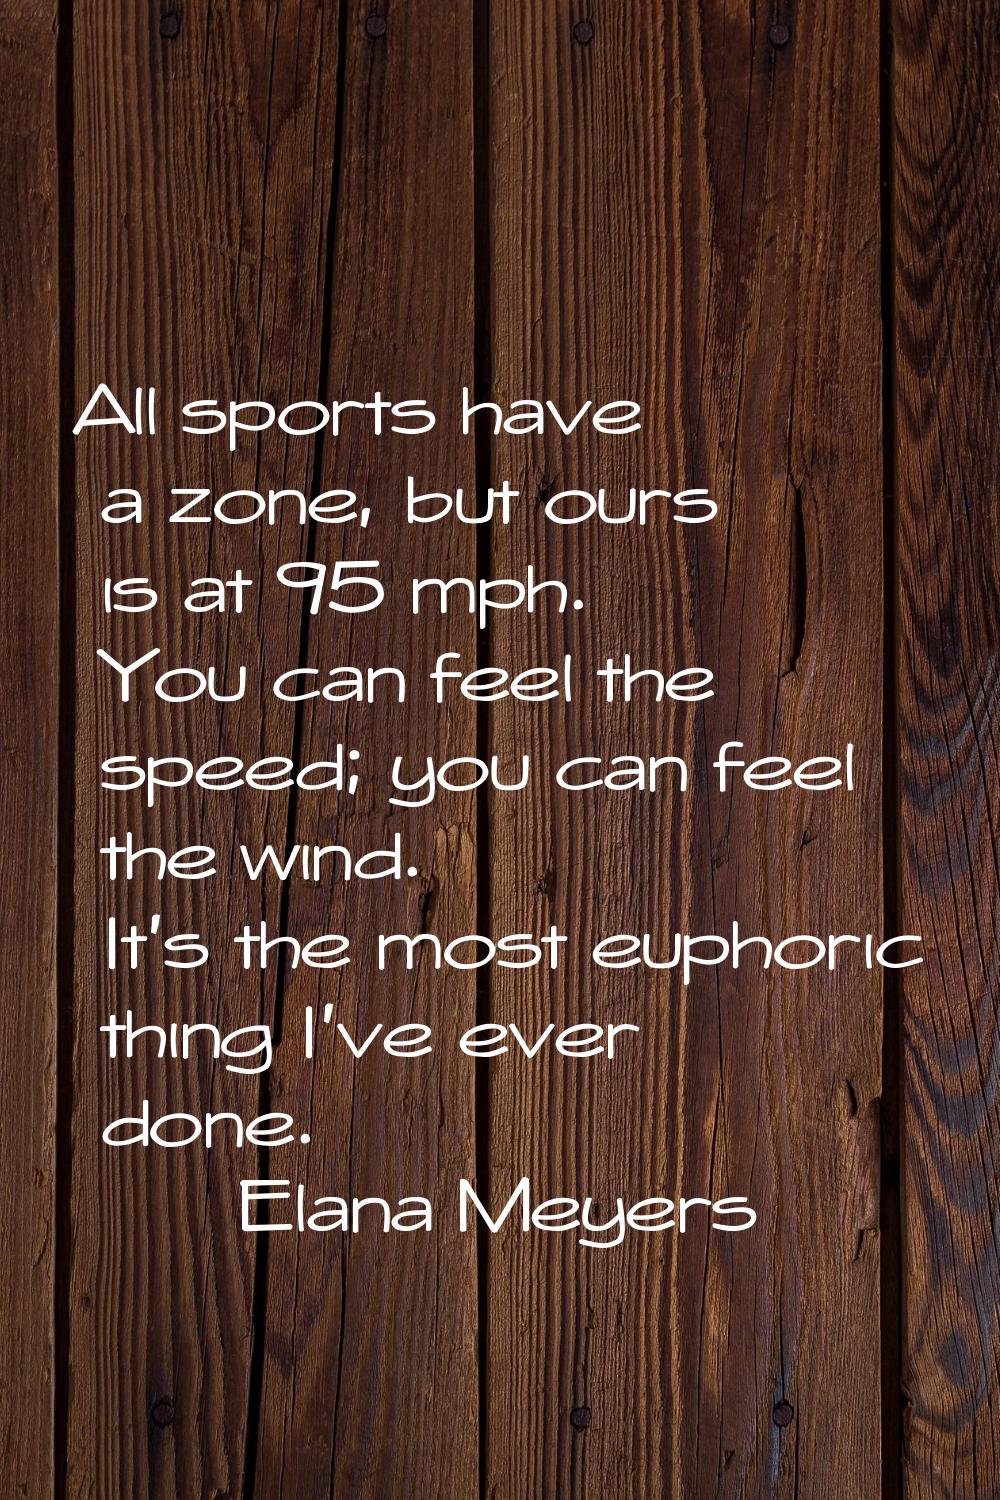 All sports have a zone, but ours is at 95 mph. You can feel the speed; you can feel the wind. It's 